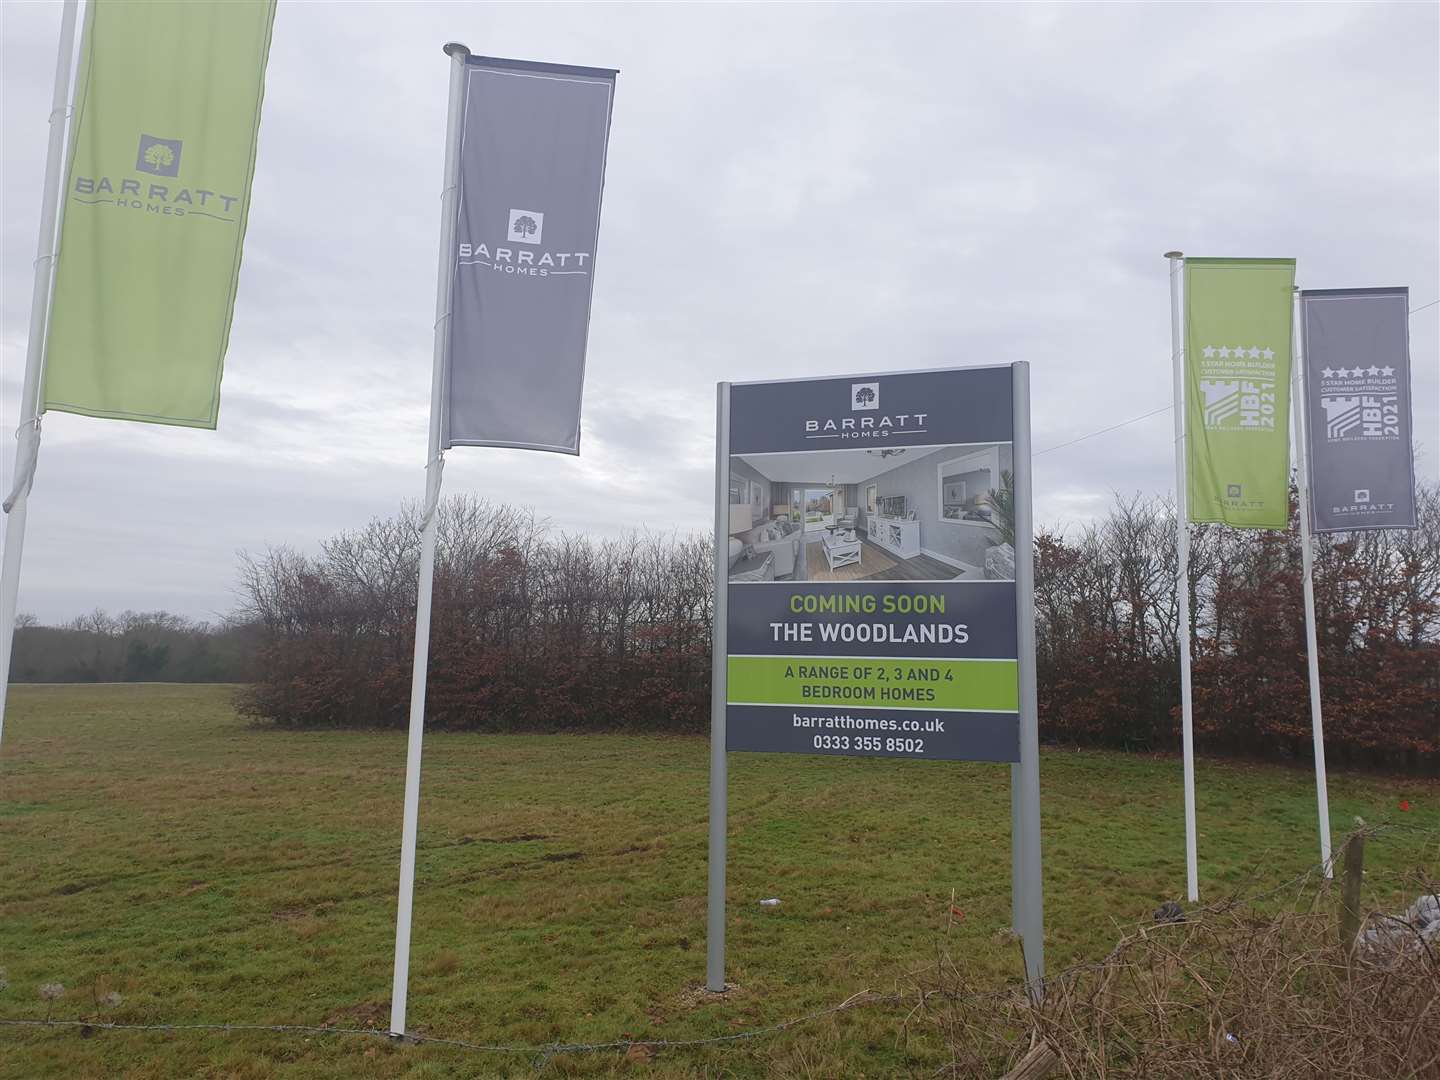 Barratt Homes has erected "coming soon" signs around the site